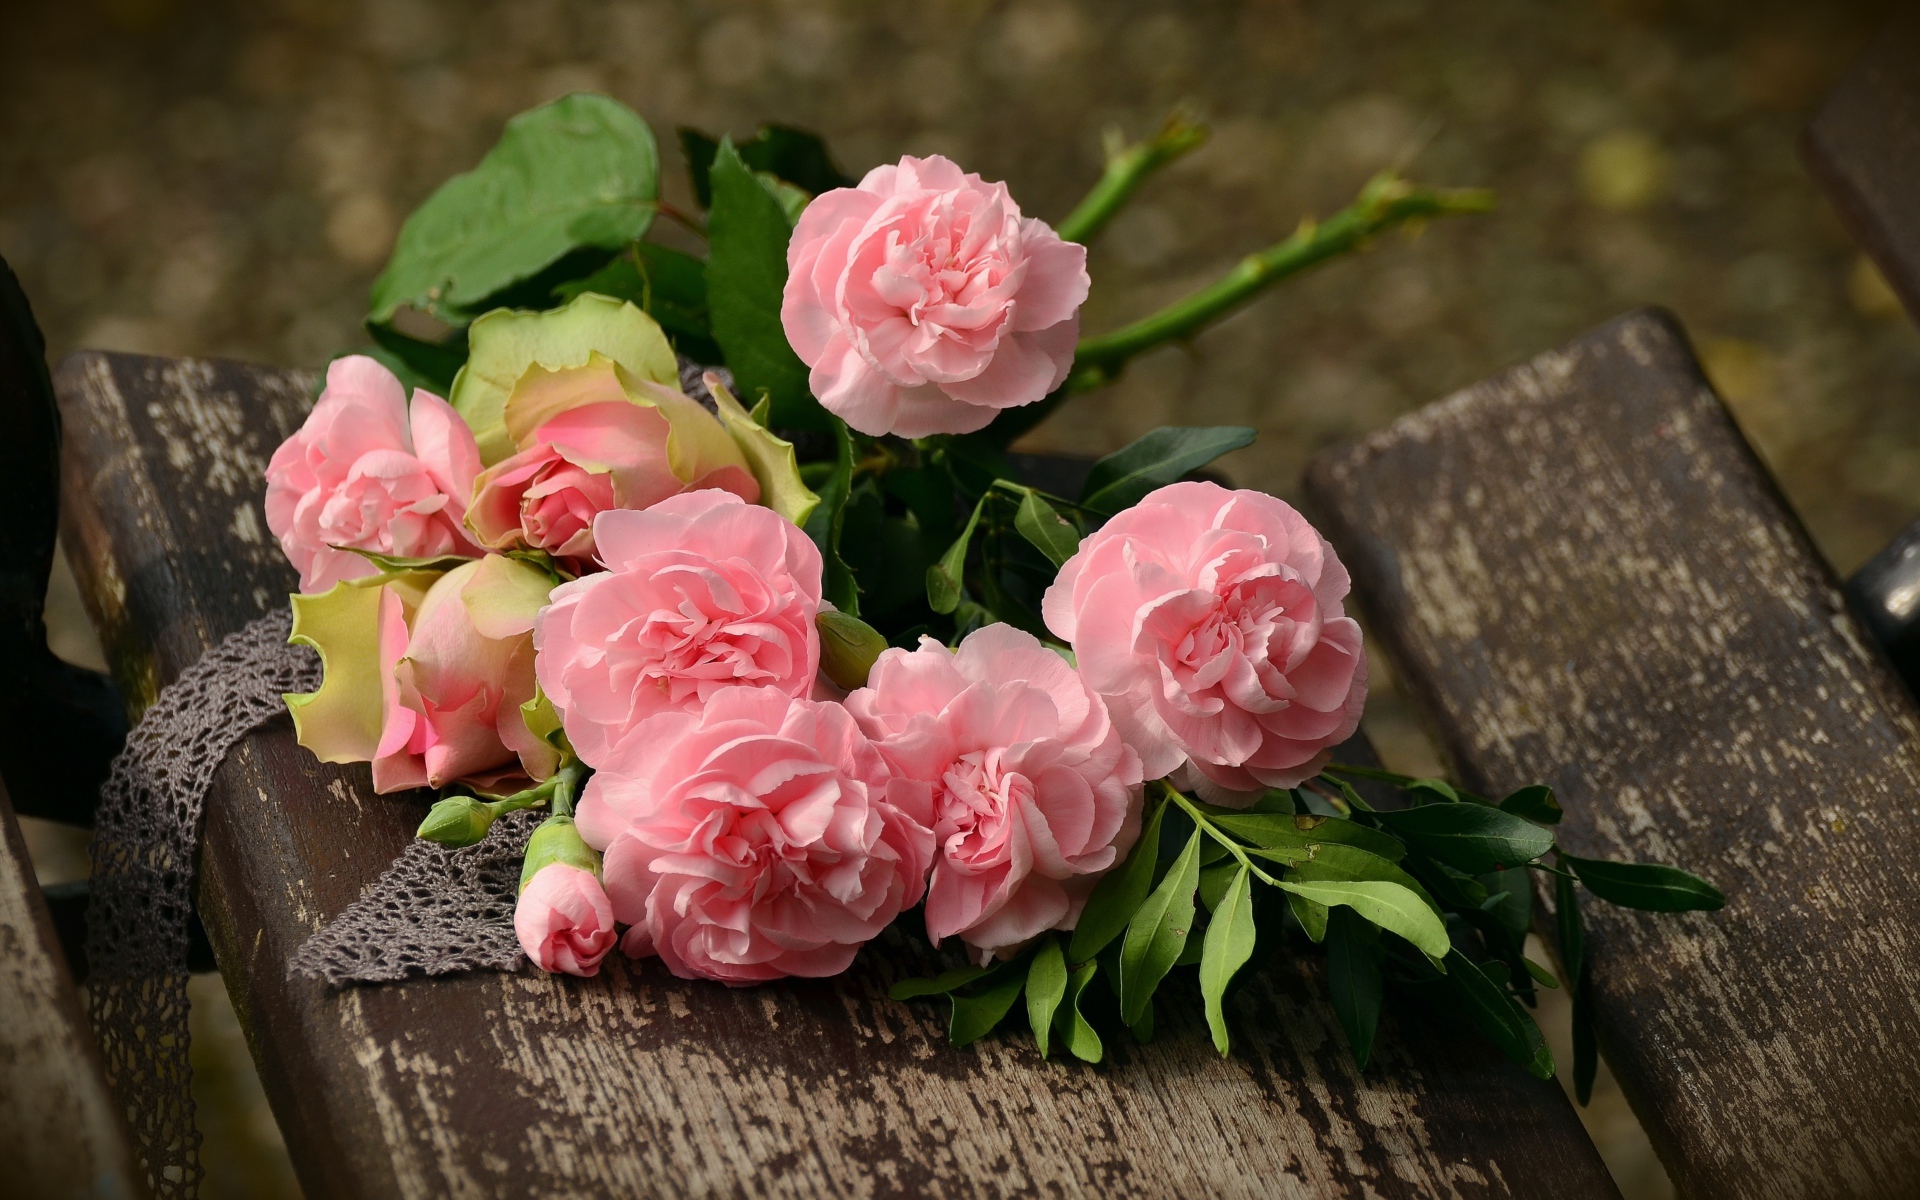 A bouquet of beautiful delicate pink roses lies on a wooden bench